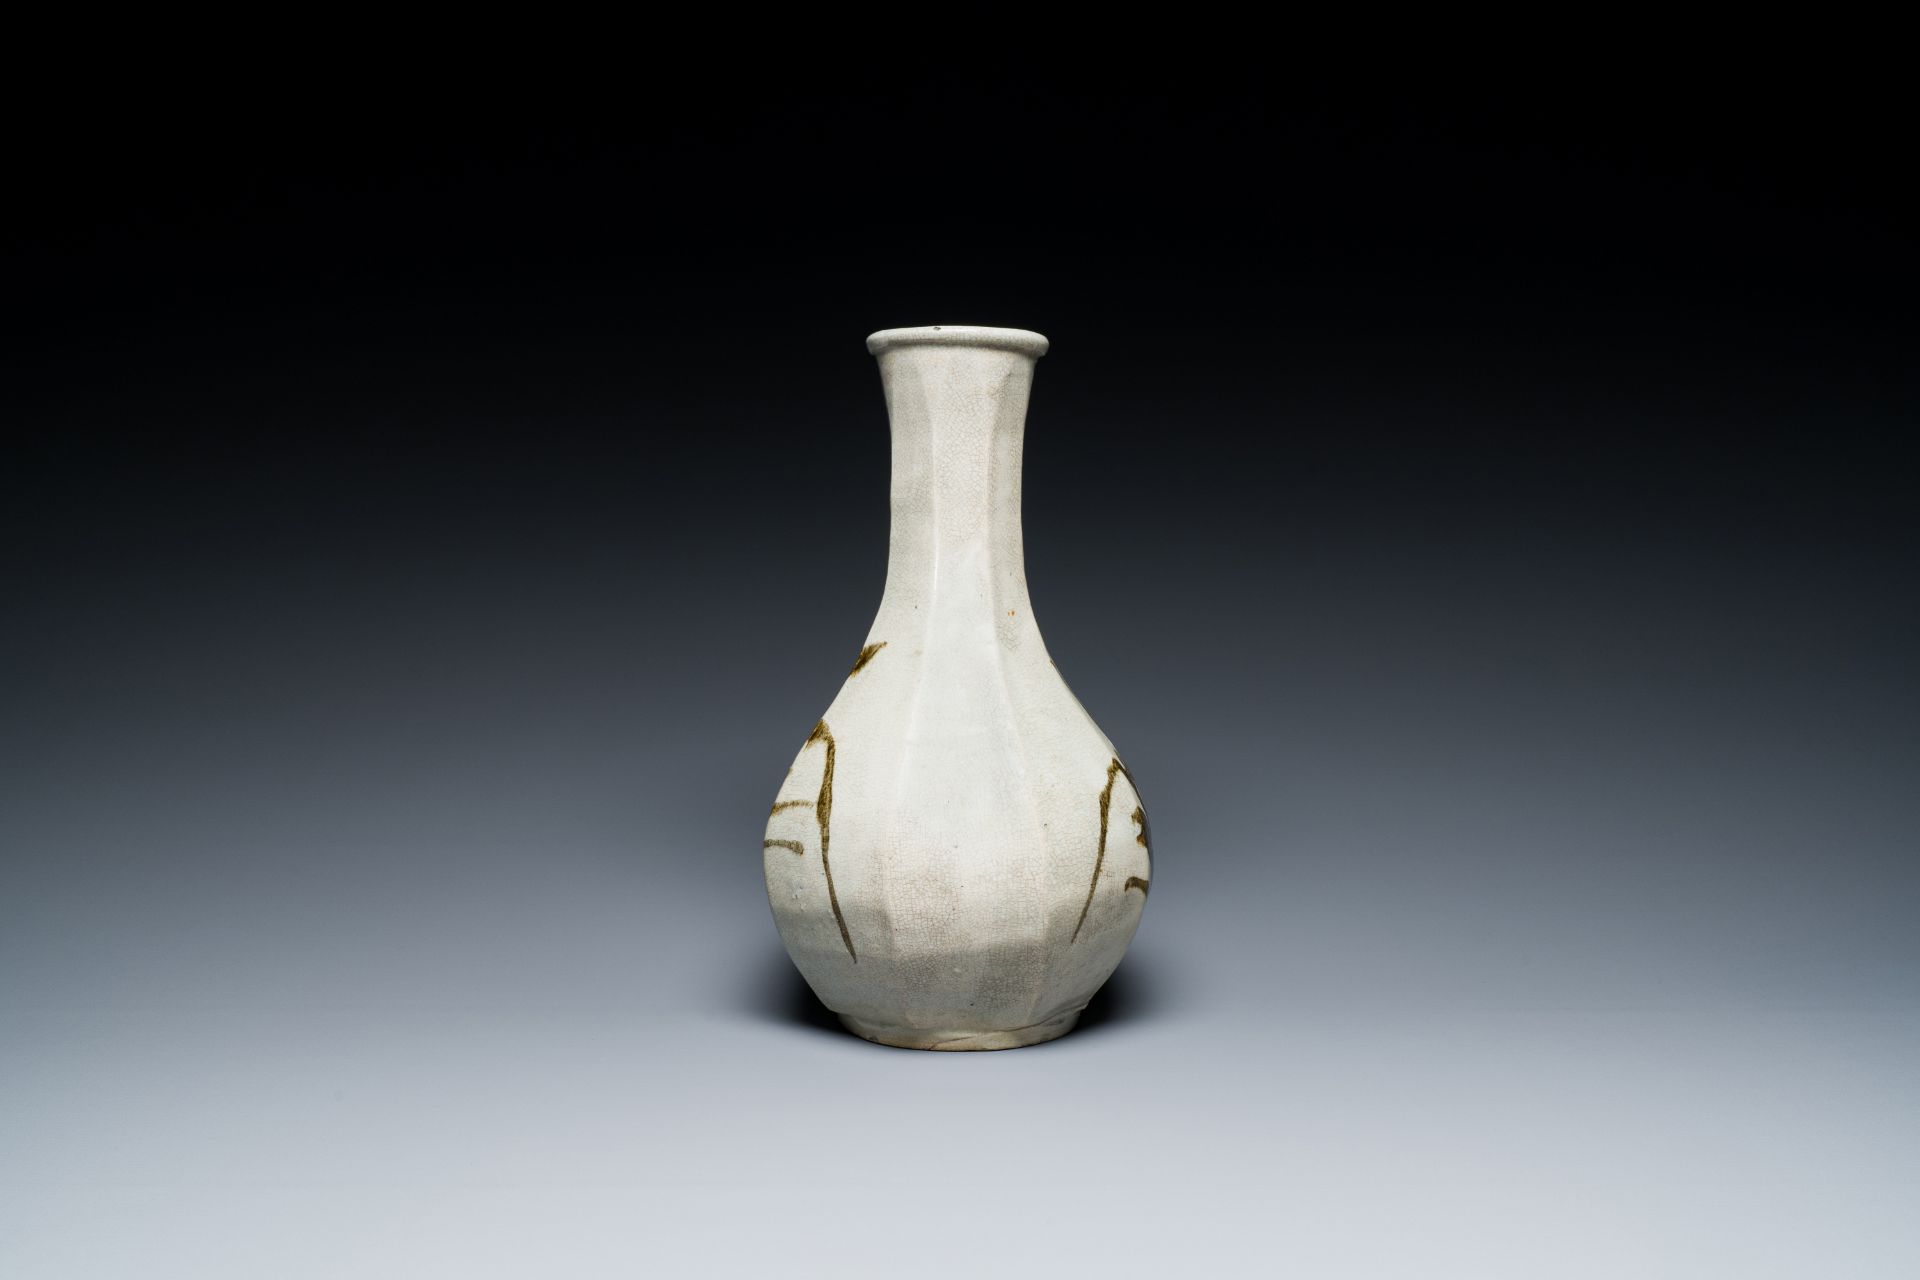 A Korean bottle vase with floral design, Joseon dynasty, 16th C. - Image 4 of 6